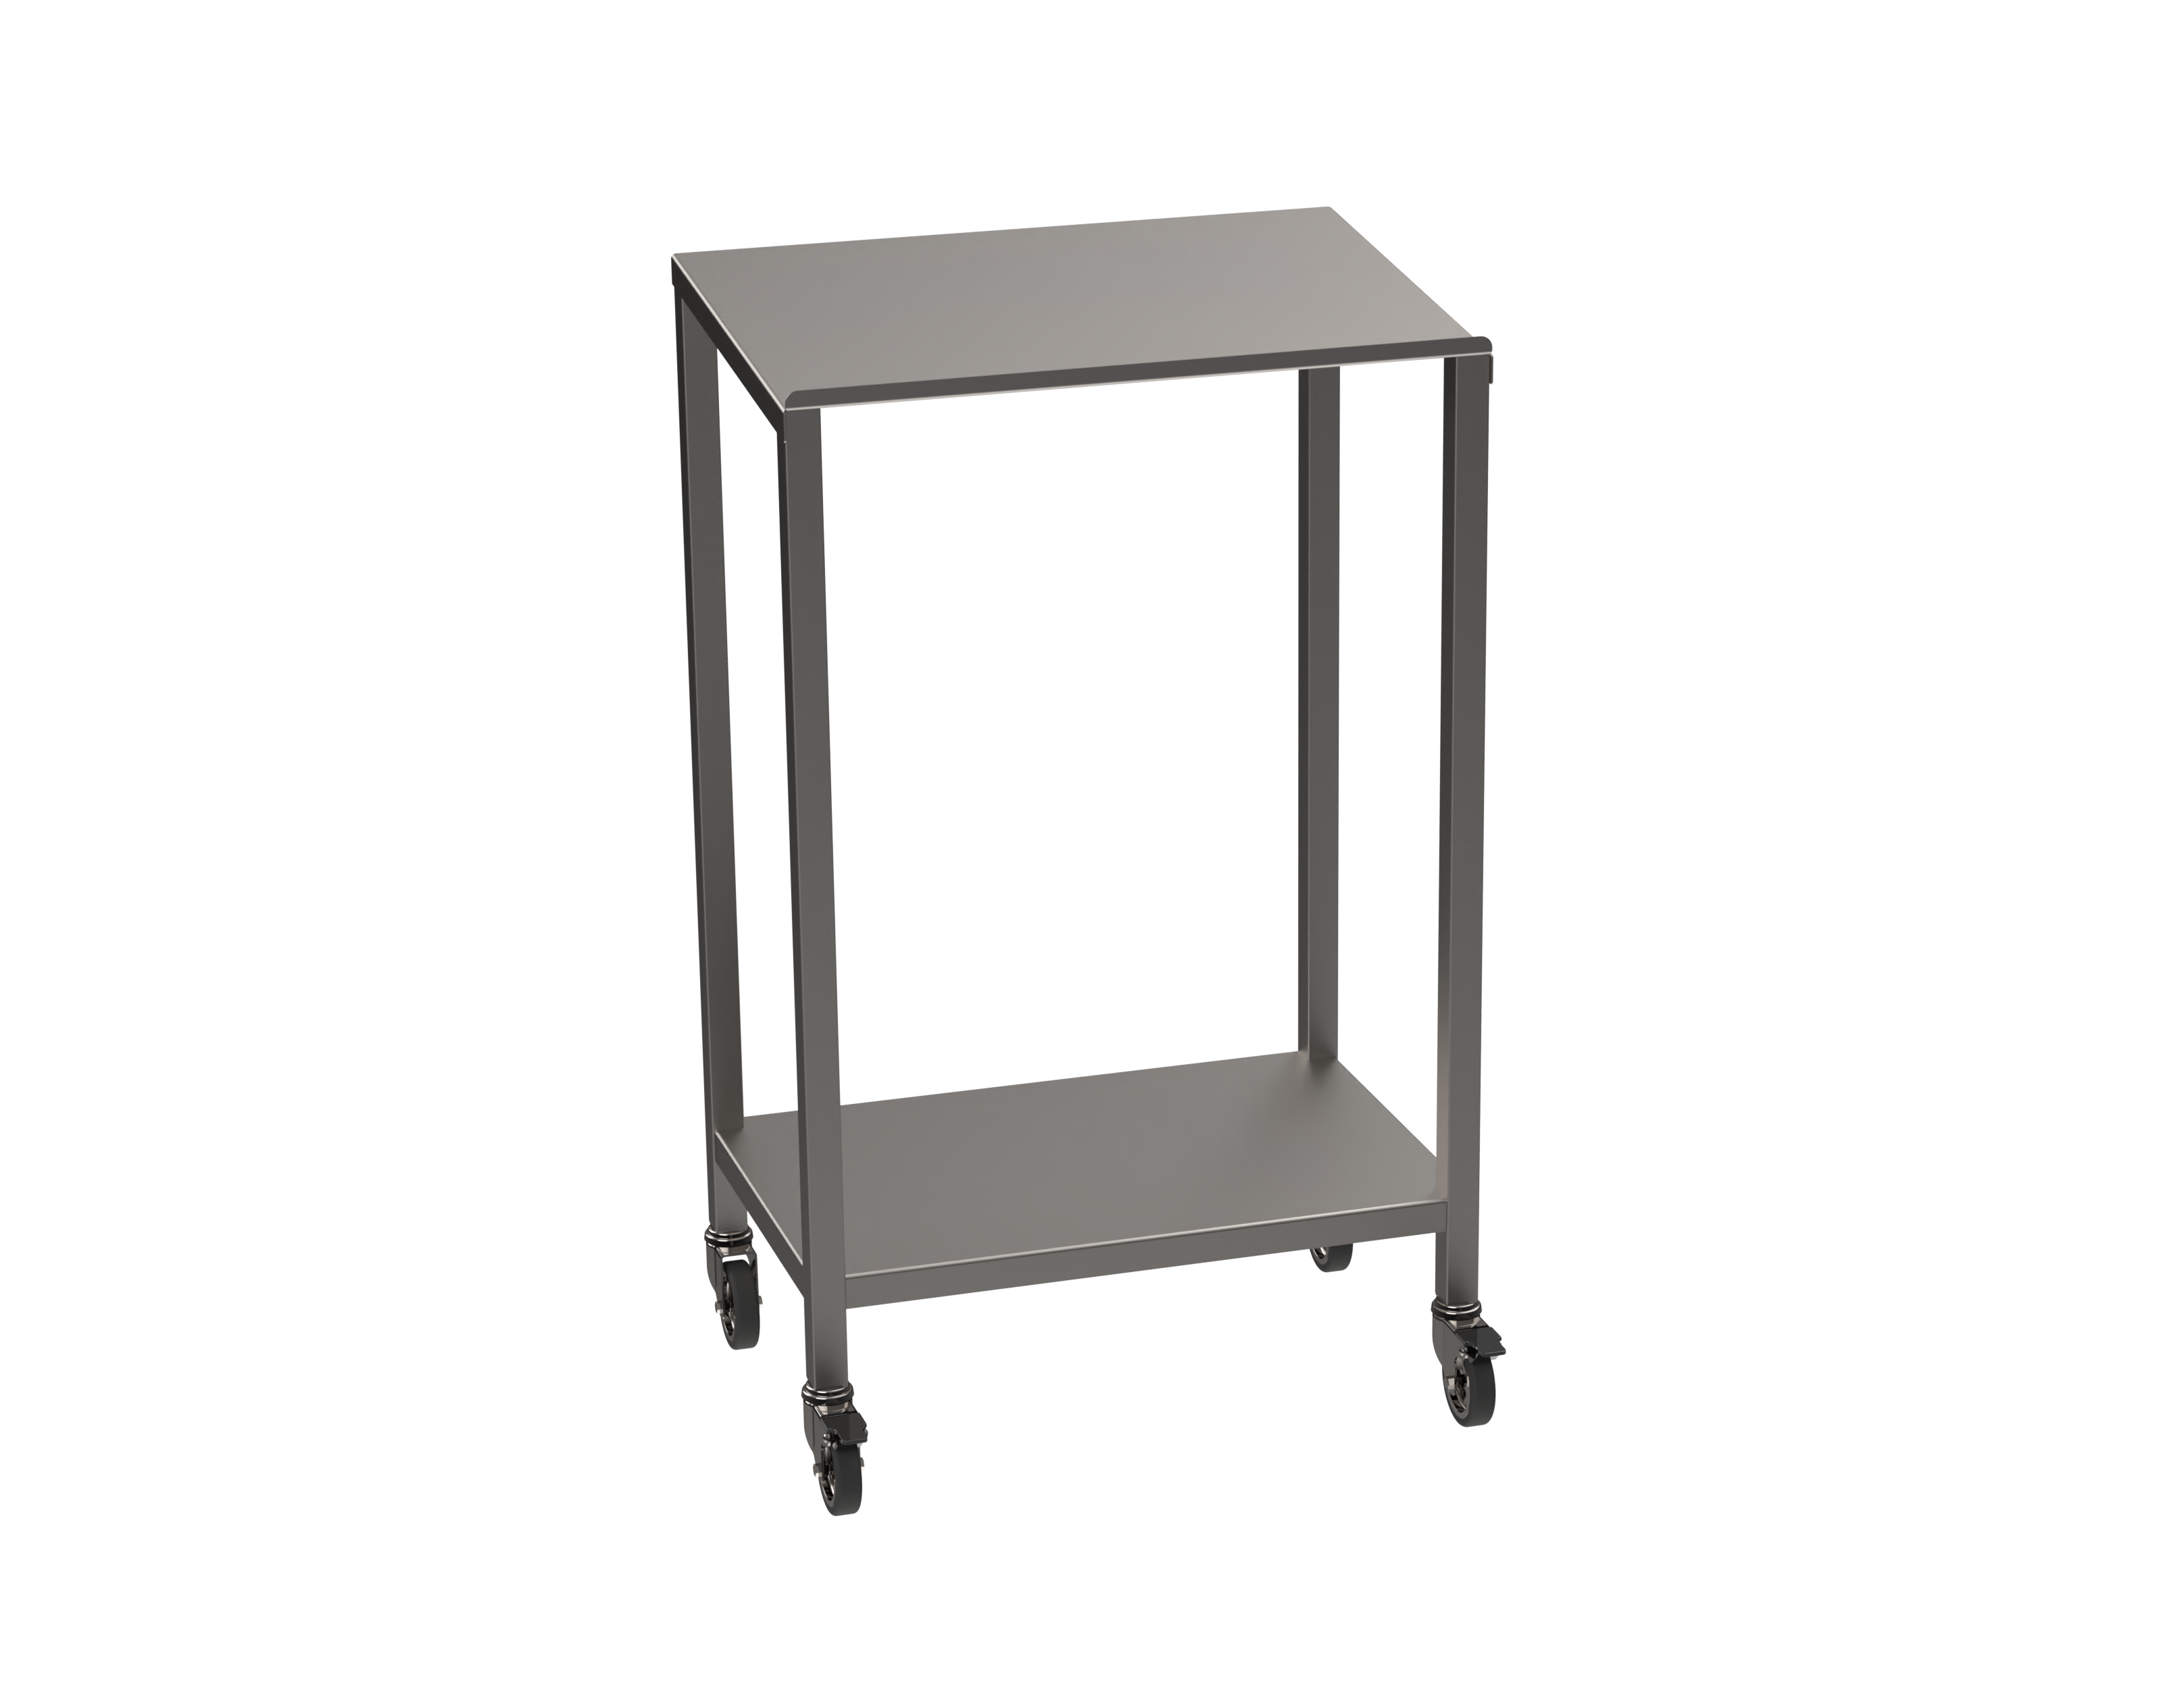 Stainless steel lectern with undershelf